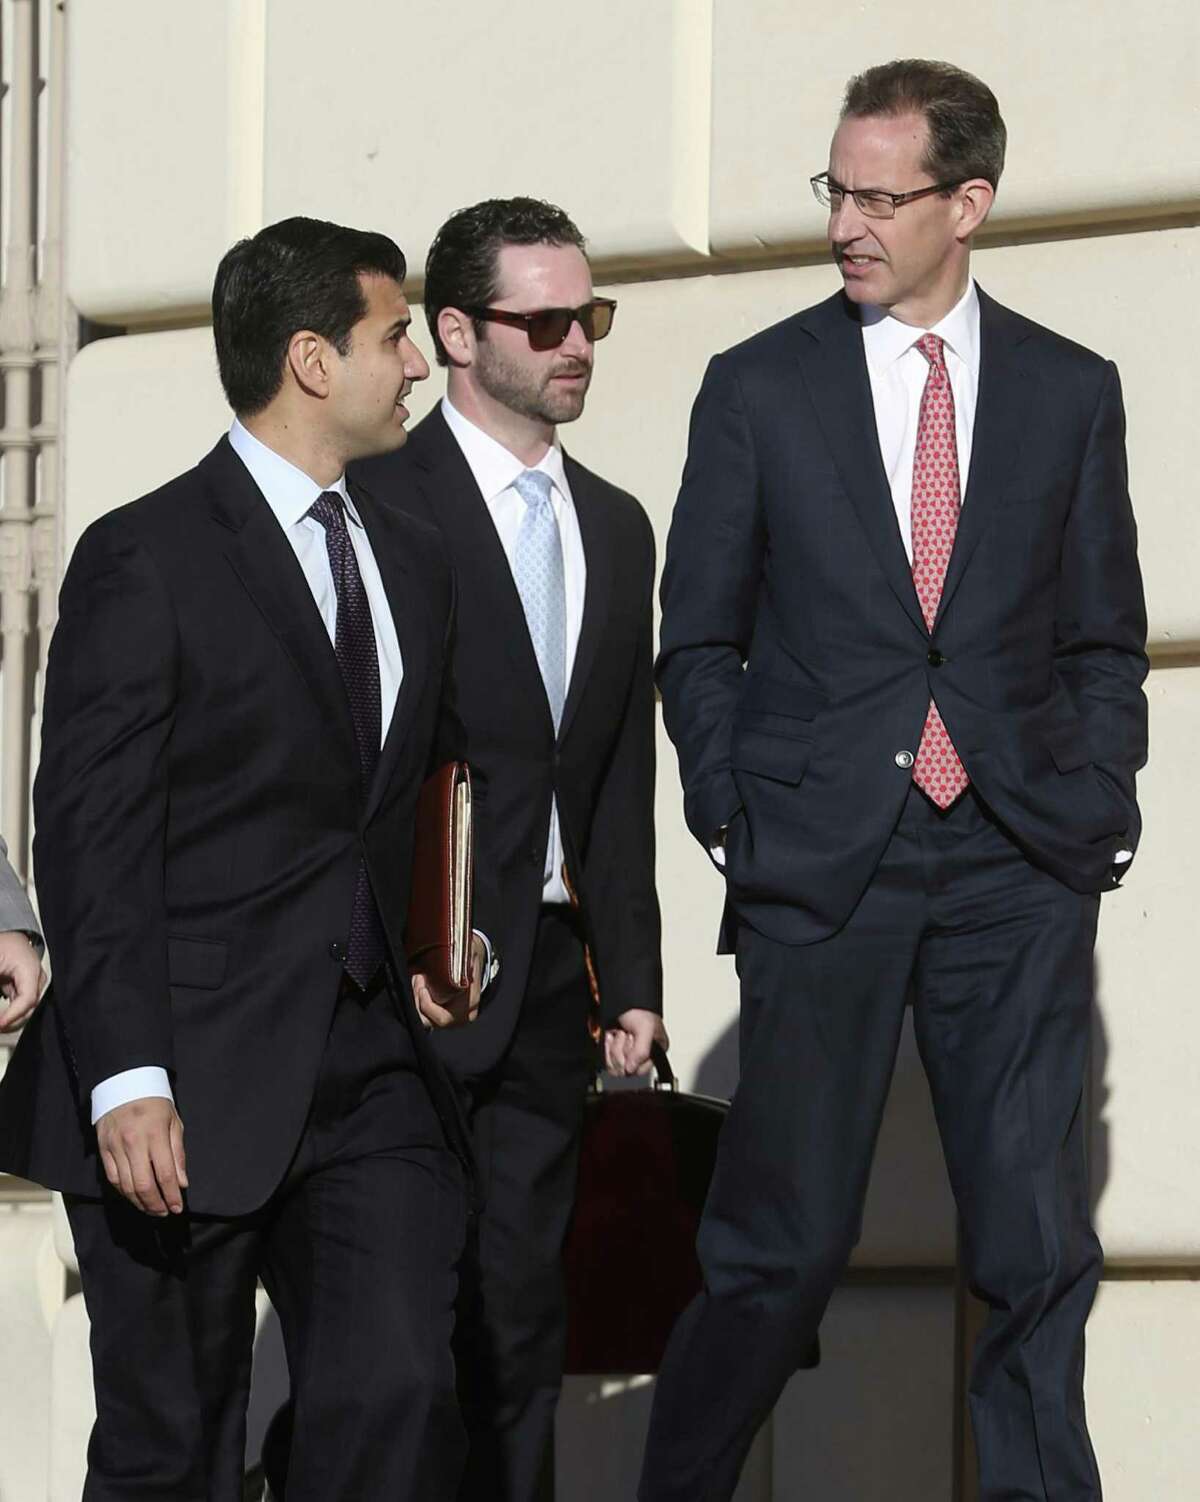 Attorney Todd Prins, right, accused of fabricating court documents and forging judges' signatures in clients' cases, arrives Tuesday morning, Dec. 6, 2016 at the Hipolito Garcia Federal Building and U.S. Courthouse for a creditors' meeting.